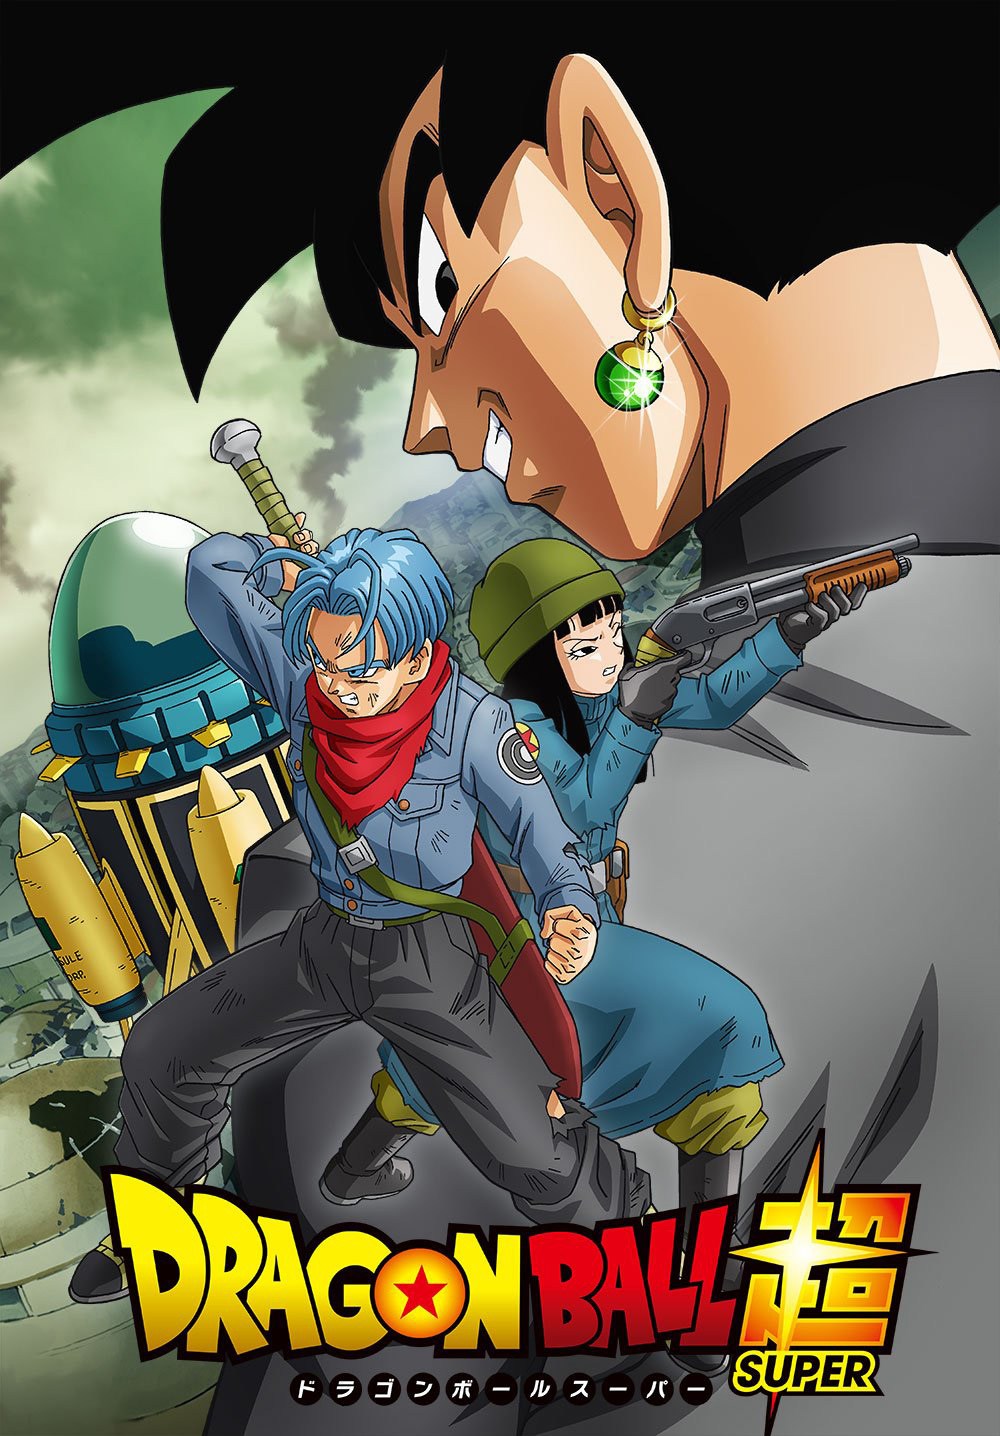 Updated Dragon Ball Super Future Trunks Arc Visual Previewed - Haruhichan